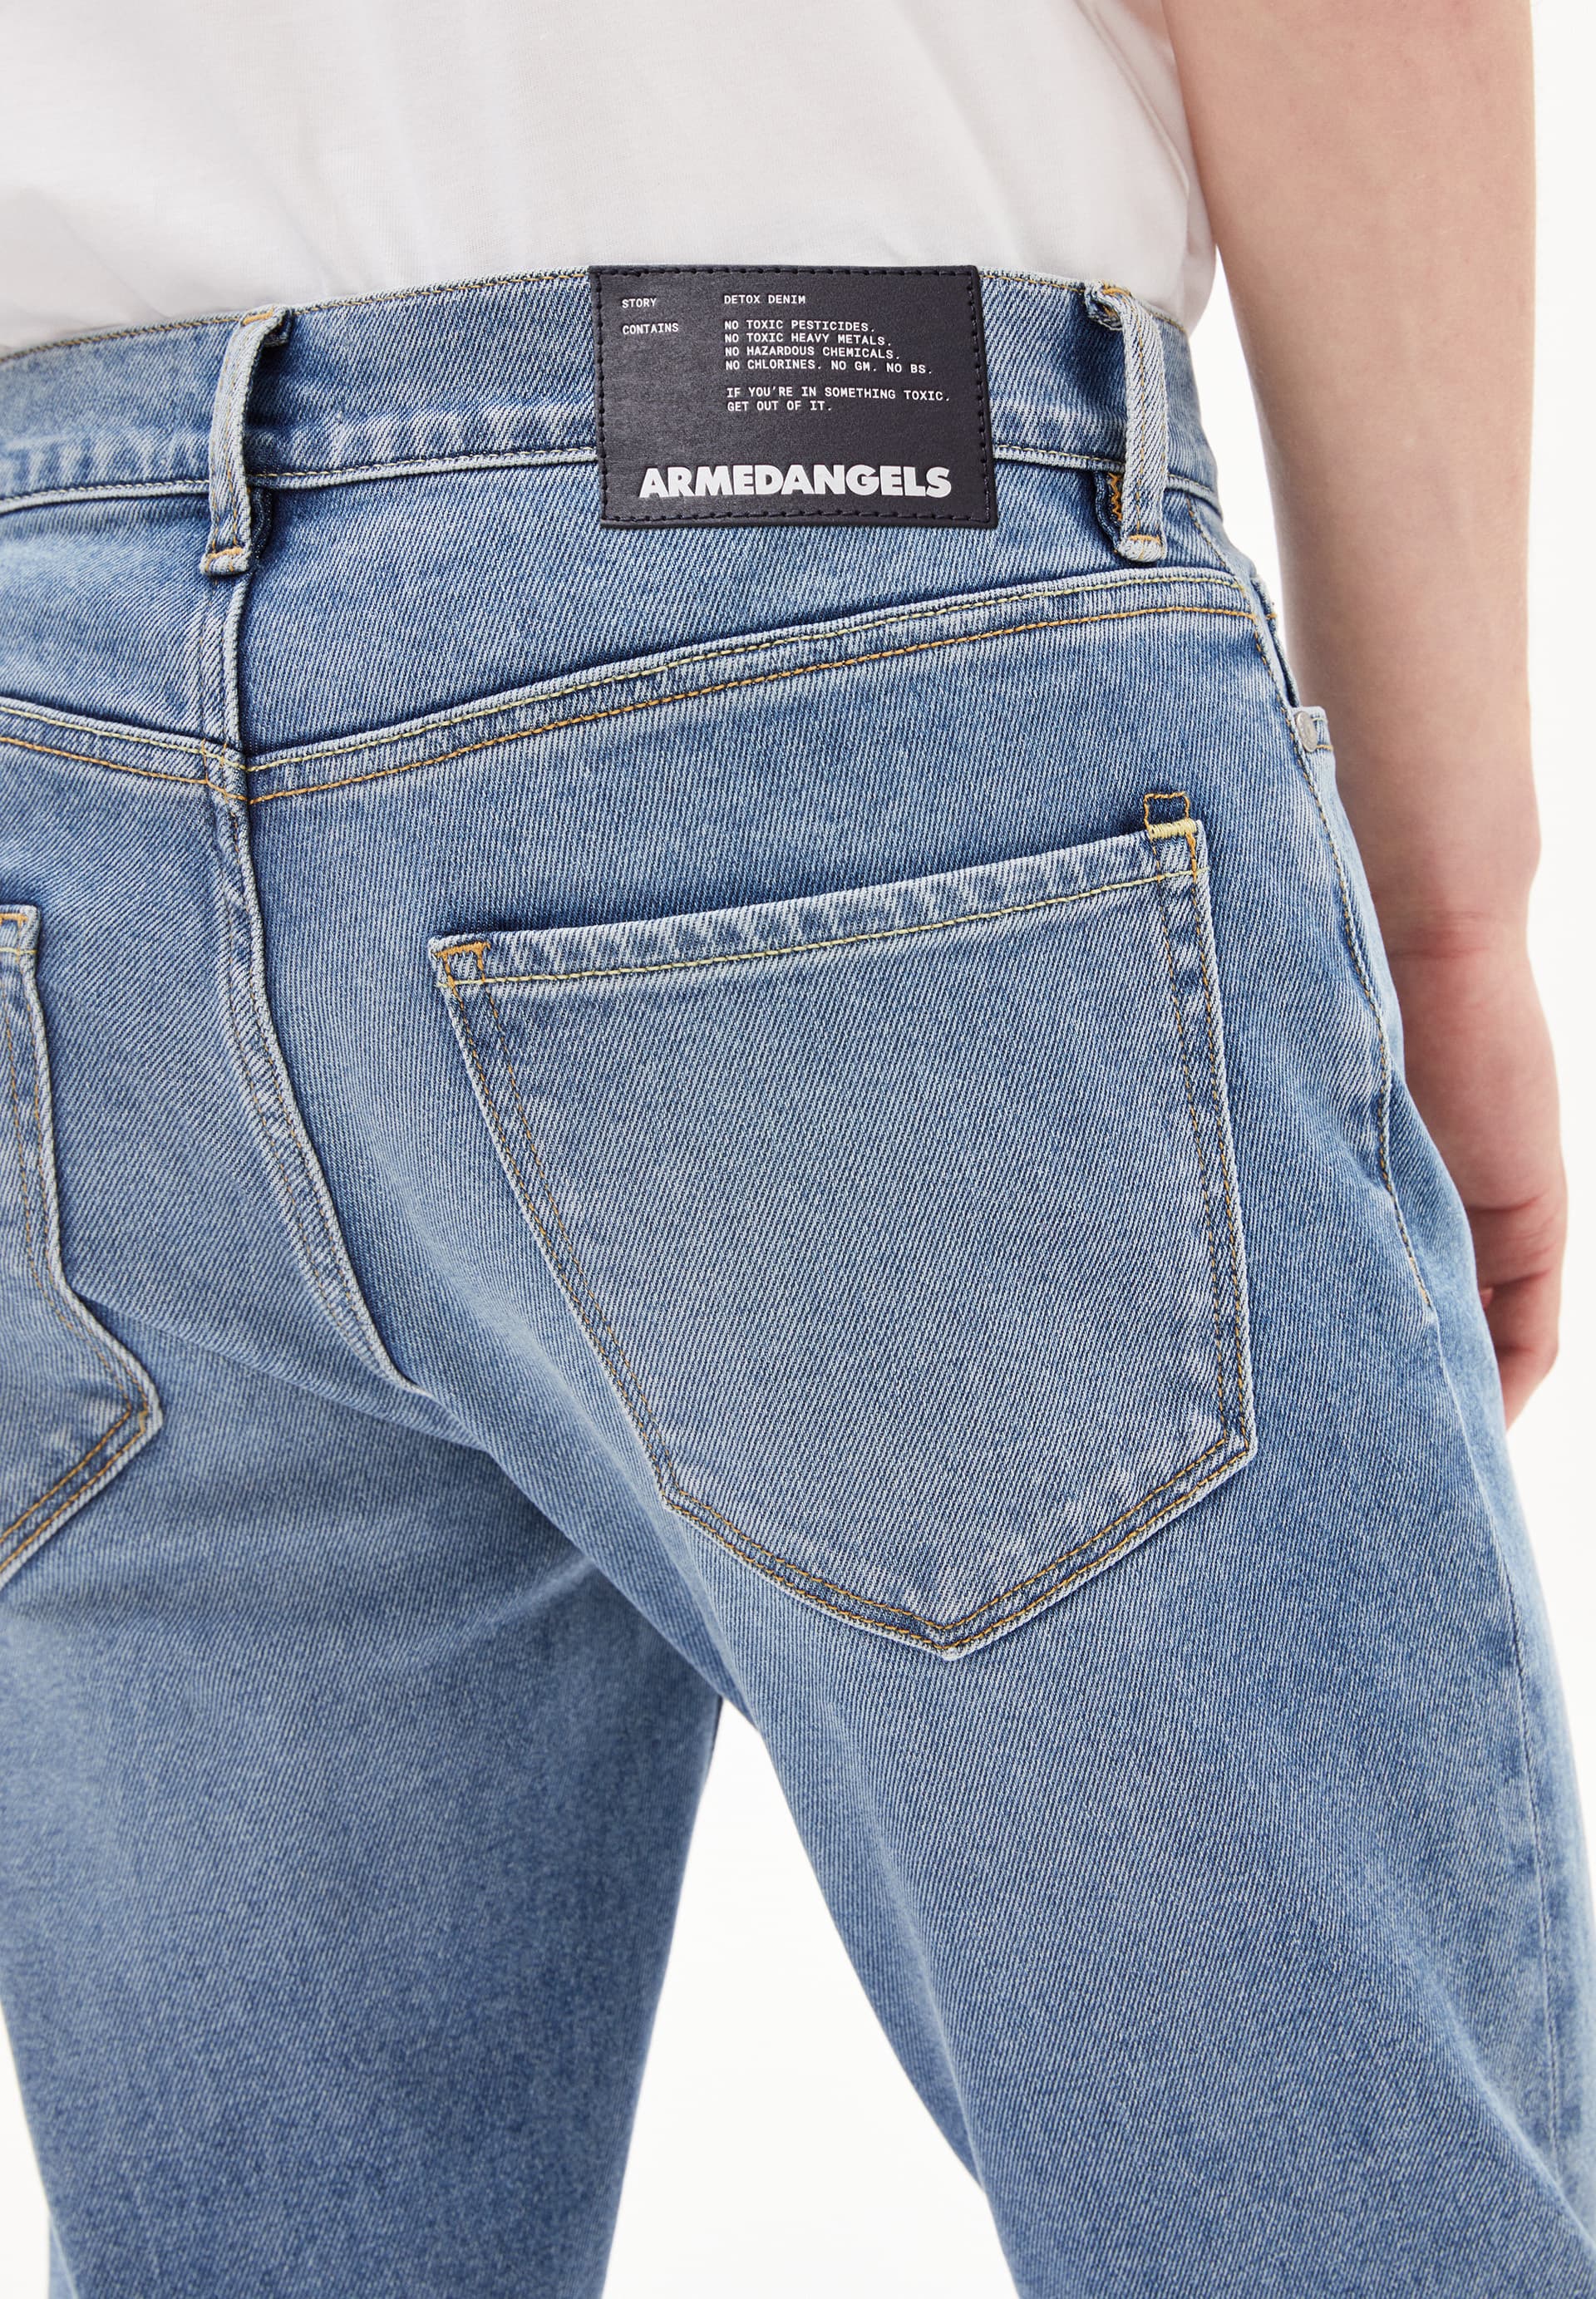 I sustainably I Men more Fit ARMEDANGELS produced Jeans for Slim